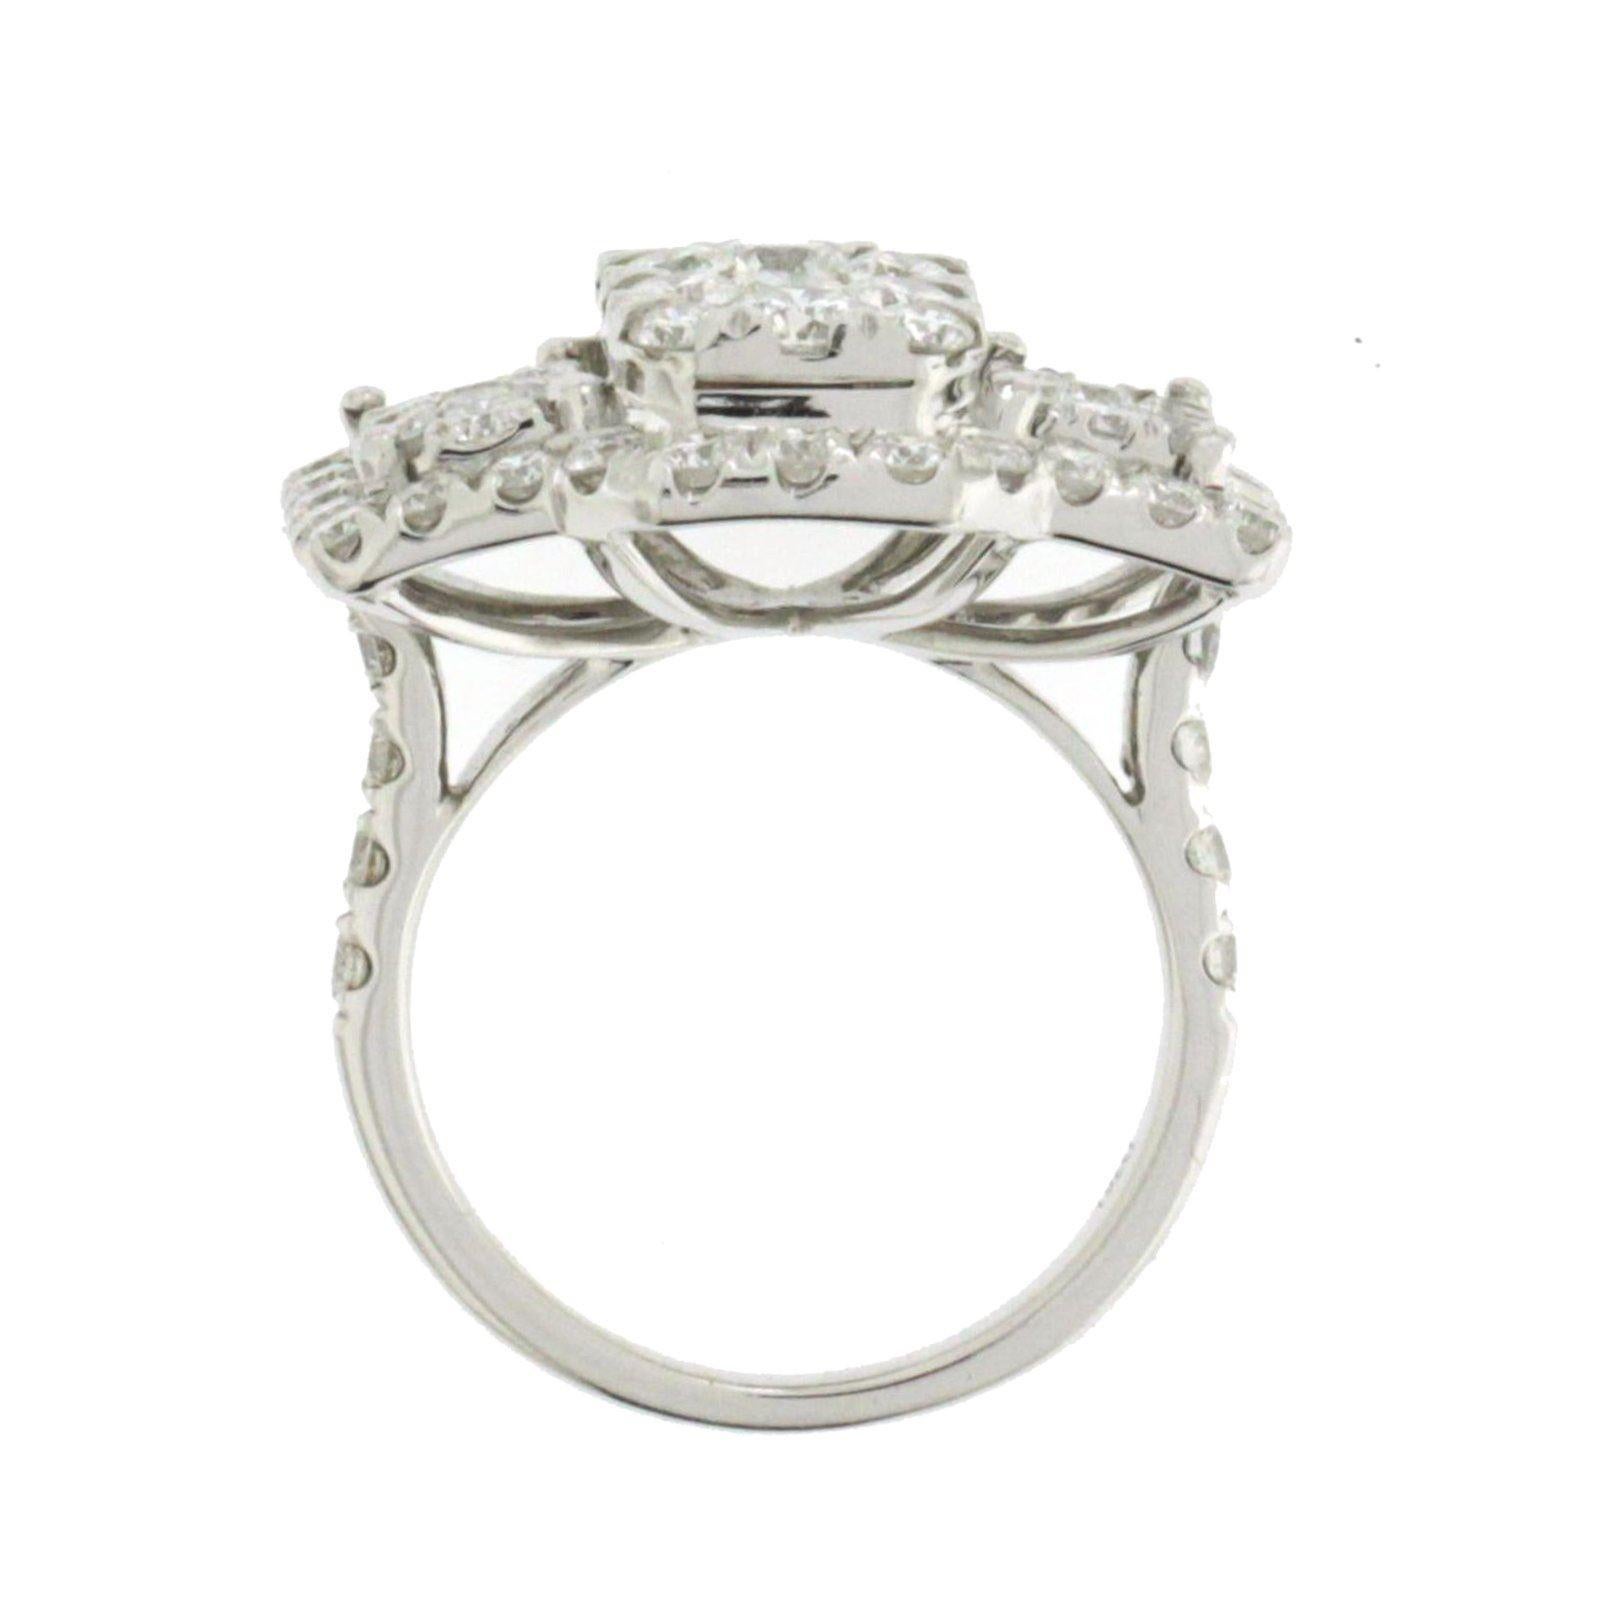 Top: 15 mm
Band Width: 2 mm
Metal: 18K White Gold 
Size: 5 to 7
Hallmarks: 750
Total Weight: 7 Grams
Stone Type: 2.86 CT G VS1-2 CT Diamonds
Condition: New
Estimated Retail Price: $12000
Stock Number: 20-02380